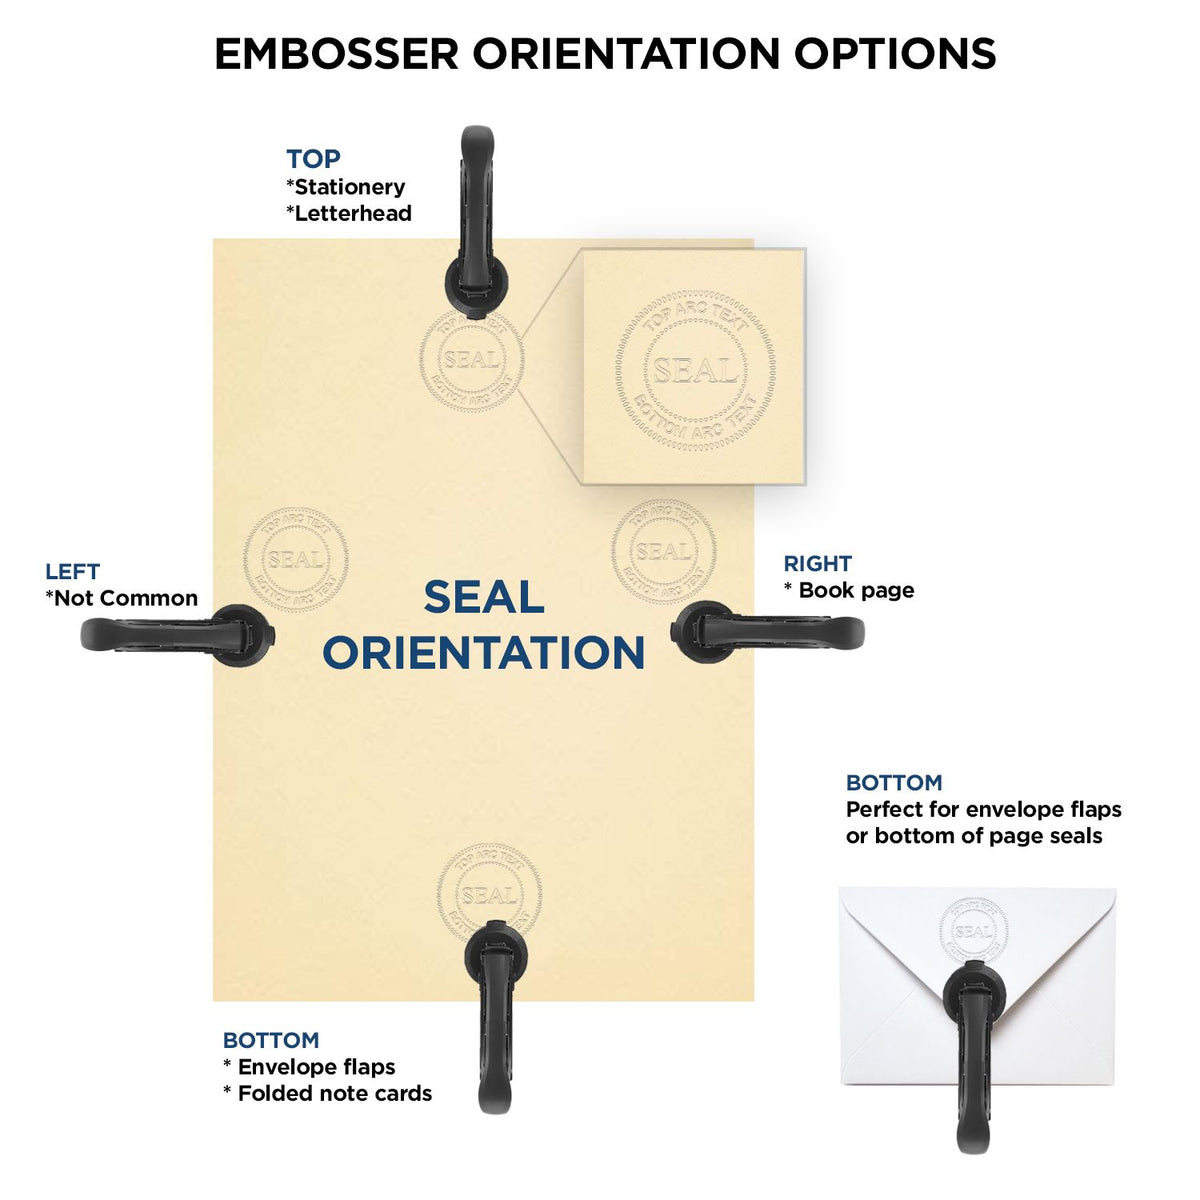 An infographic for the Heavy Duty Cast Iron Alaska Land Surveyor Seal Embosser showing embosser orientation, this is showing examples of a top, bottom, right and left insert.